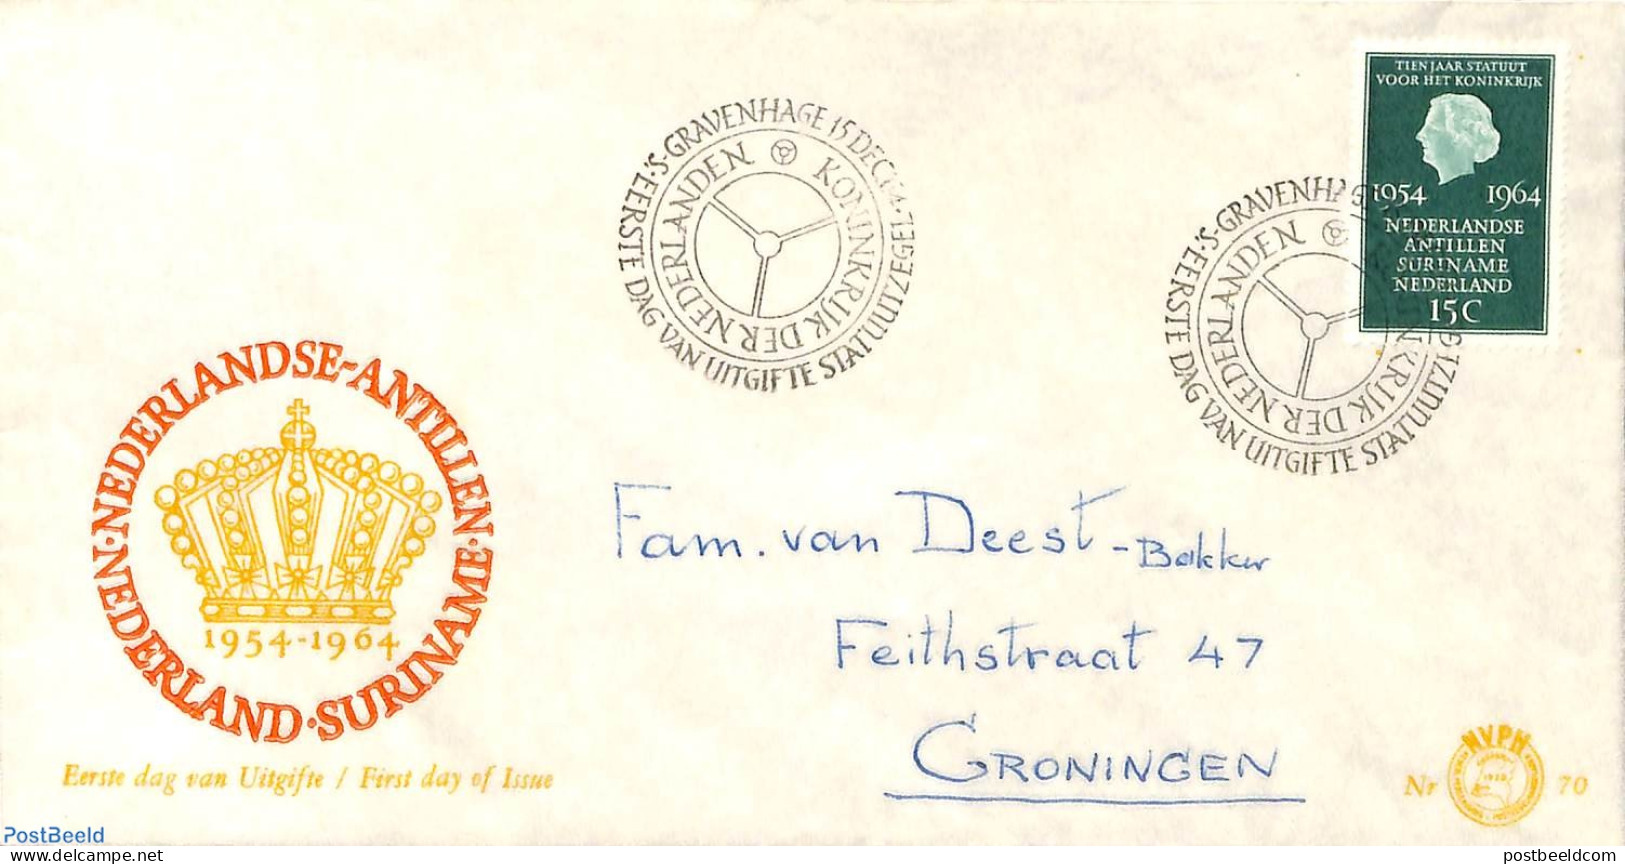 Netherlands 1964 Statute 1v, FDC Red Colour Double Printed, First Day Cover, Various - Errors, Misprints, Plate Flaws - Covers & Documents